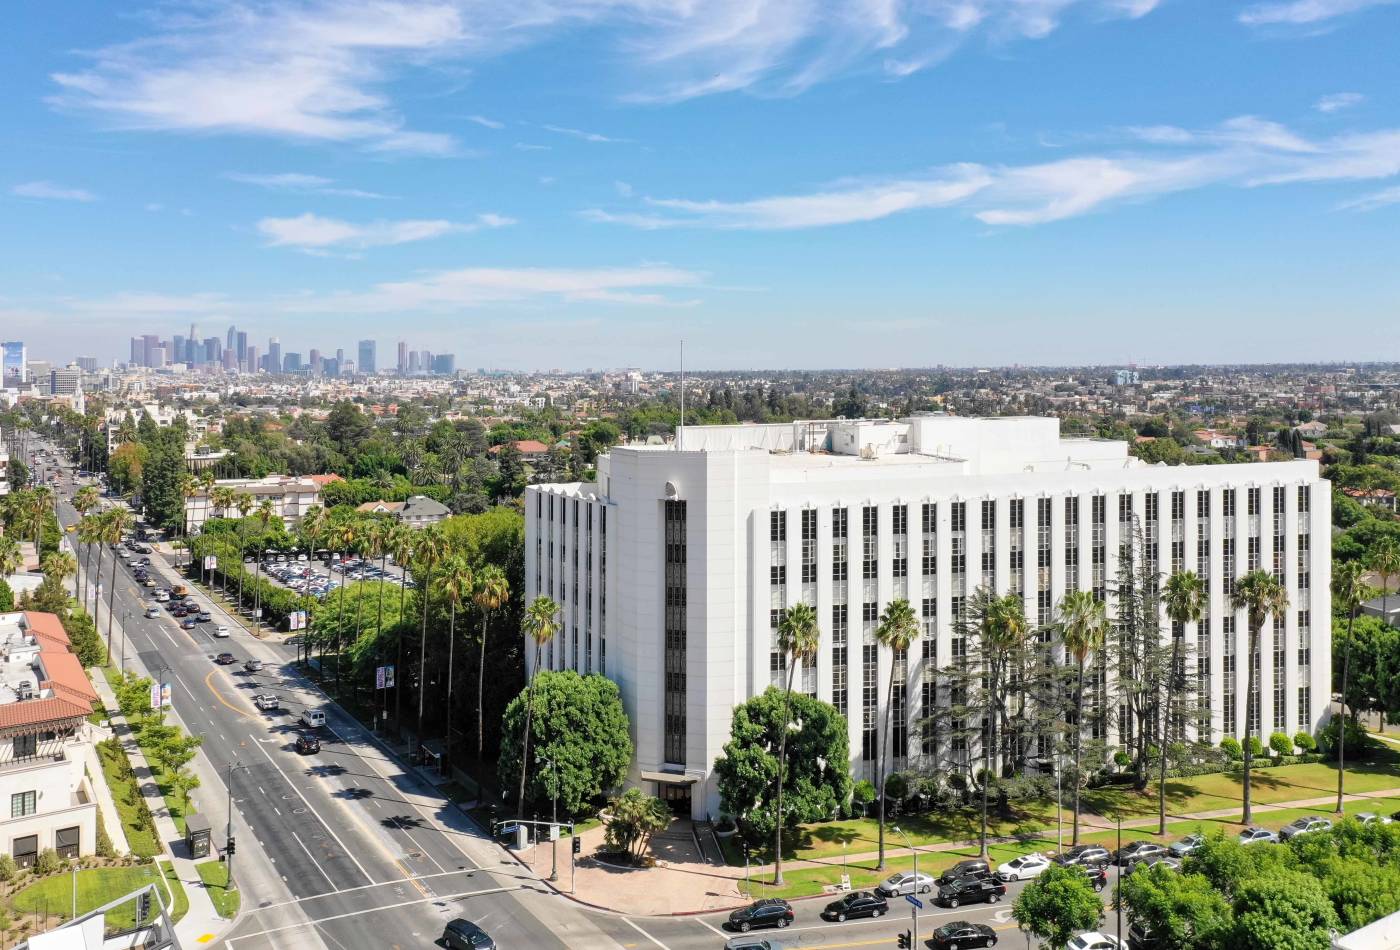 On a four-acre site along Wilshire Boulevard in Los Angeles, we're working to convert the historic Farmers Insurance building to 63 condominiums, while also designing eight new townhomes over two levels of subterranean parking.